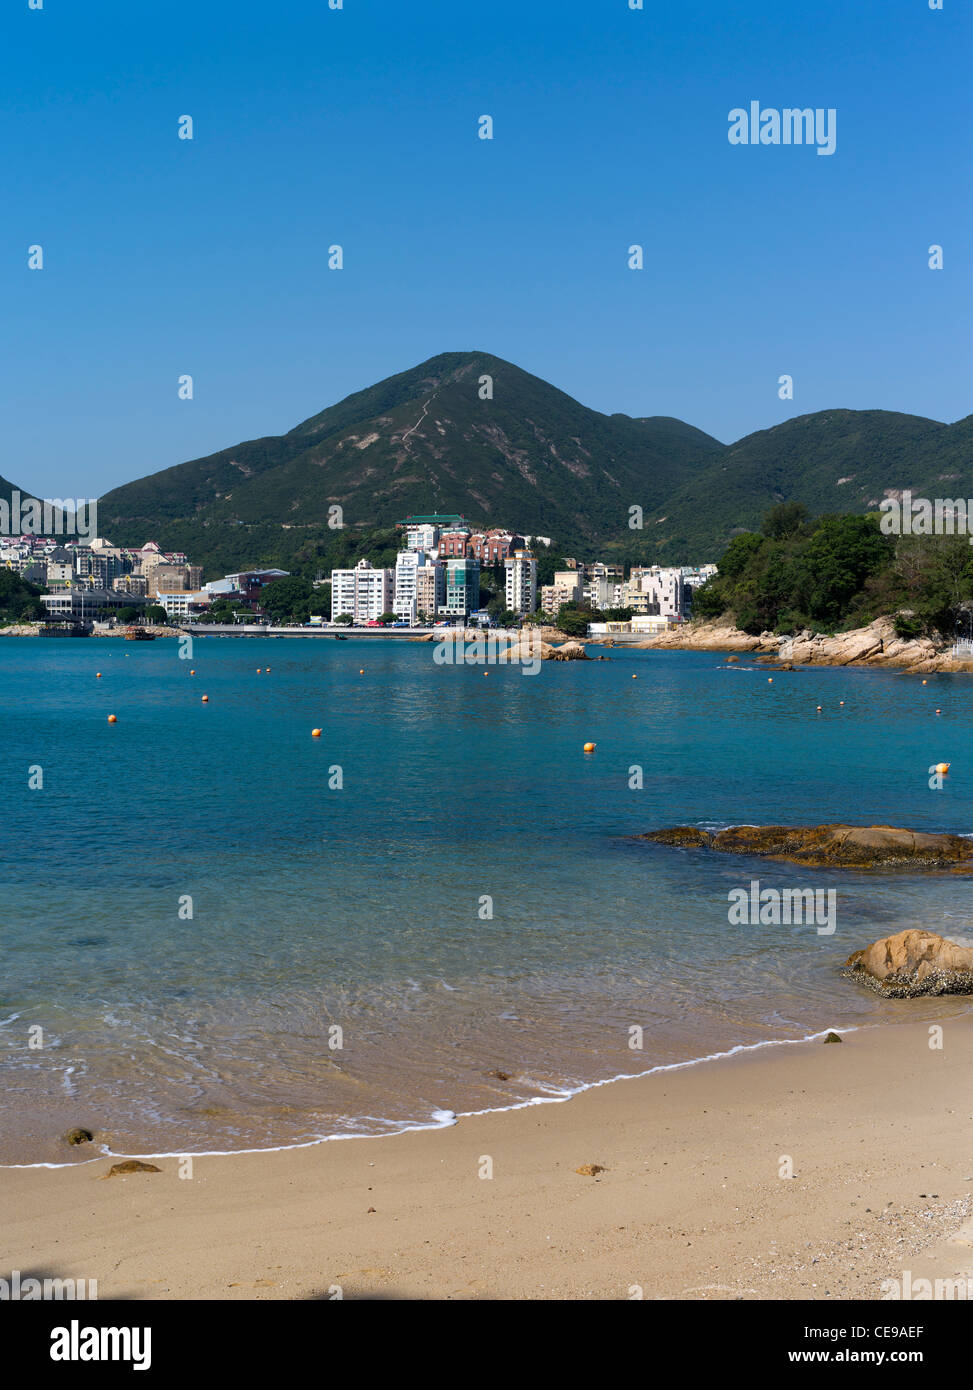 Dh St Stephens Bay Beach STANLEY HONG KONG Stanley Bay Village isola inverno Foto Stock